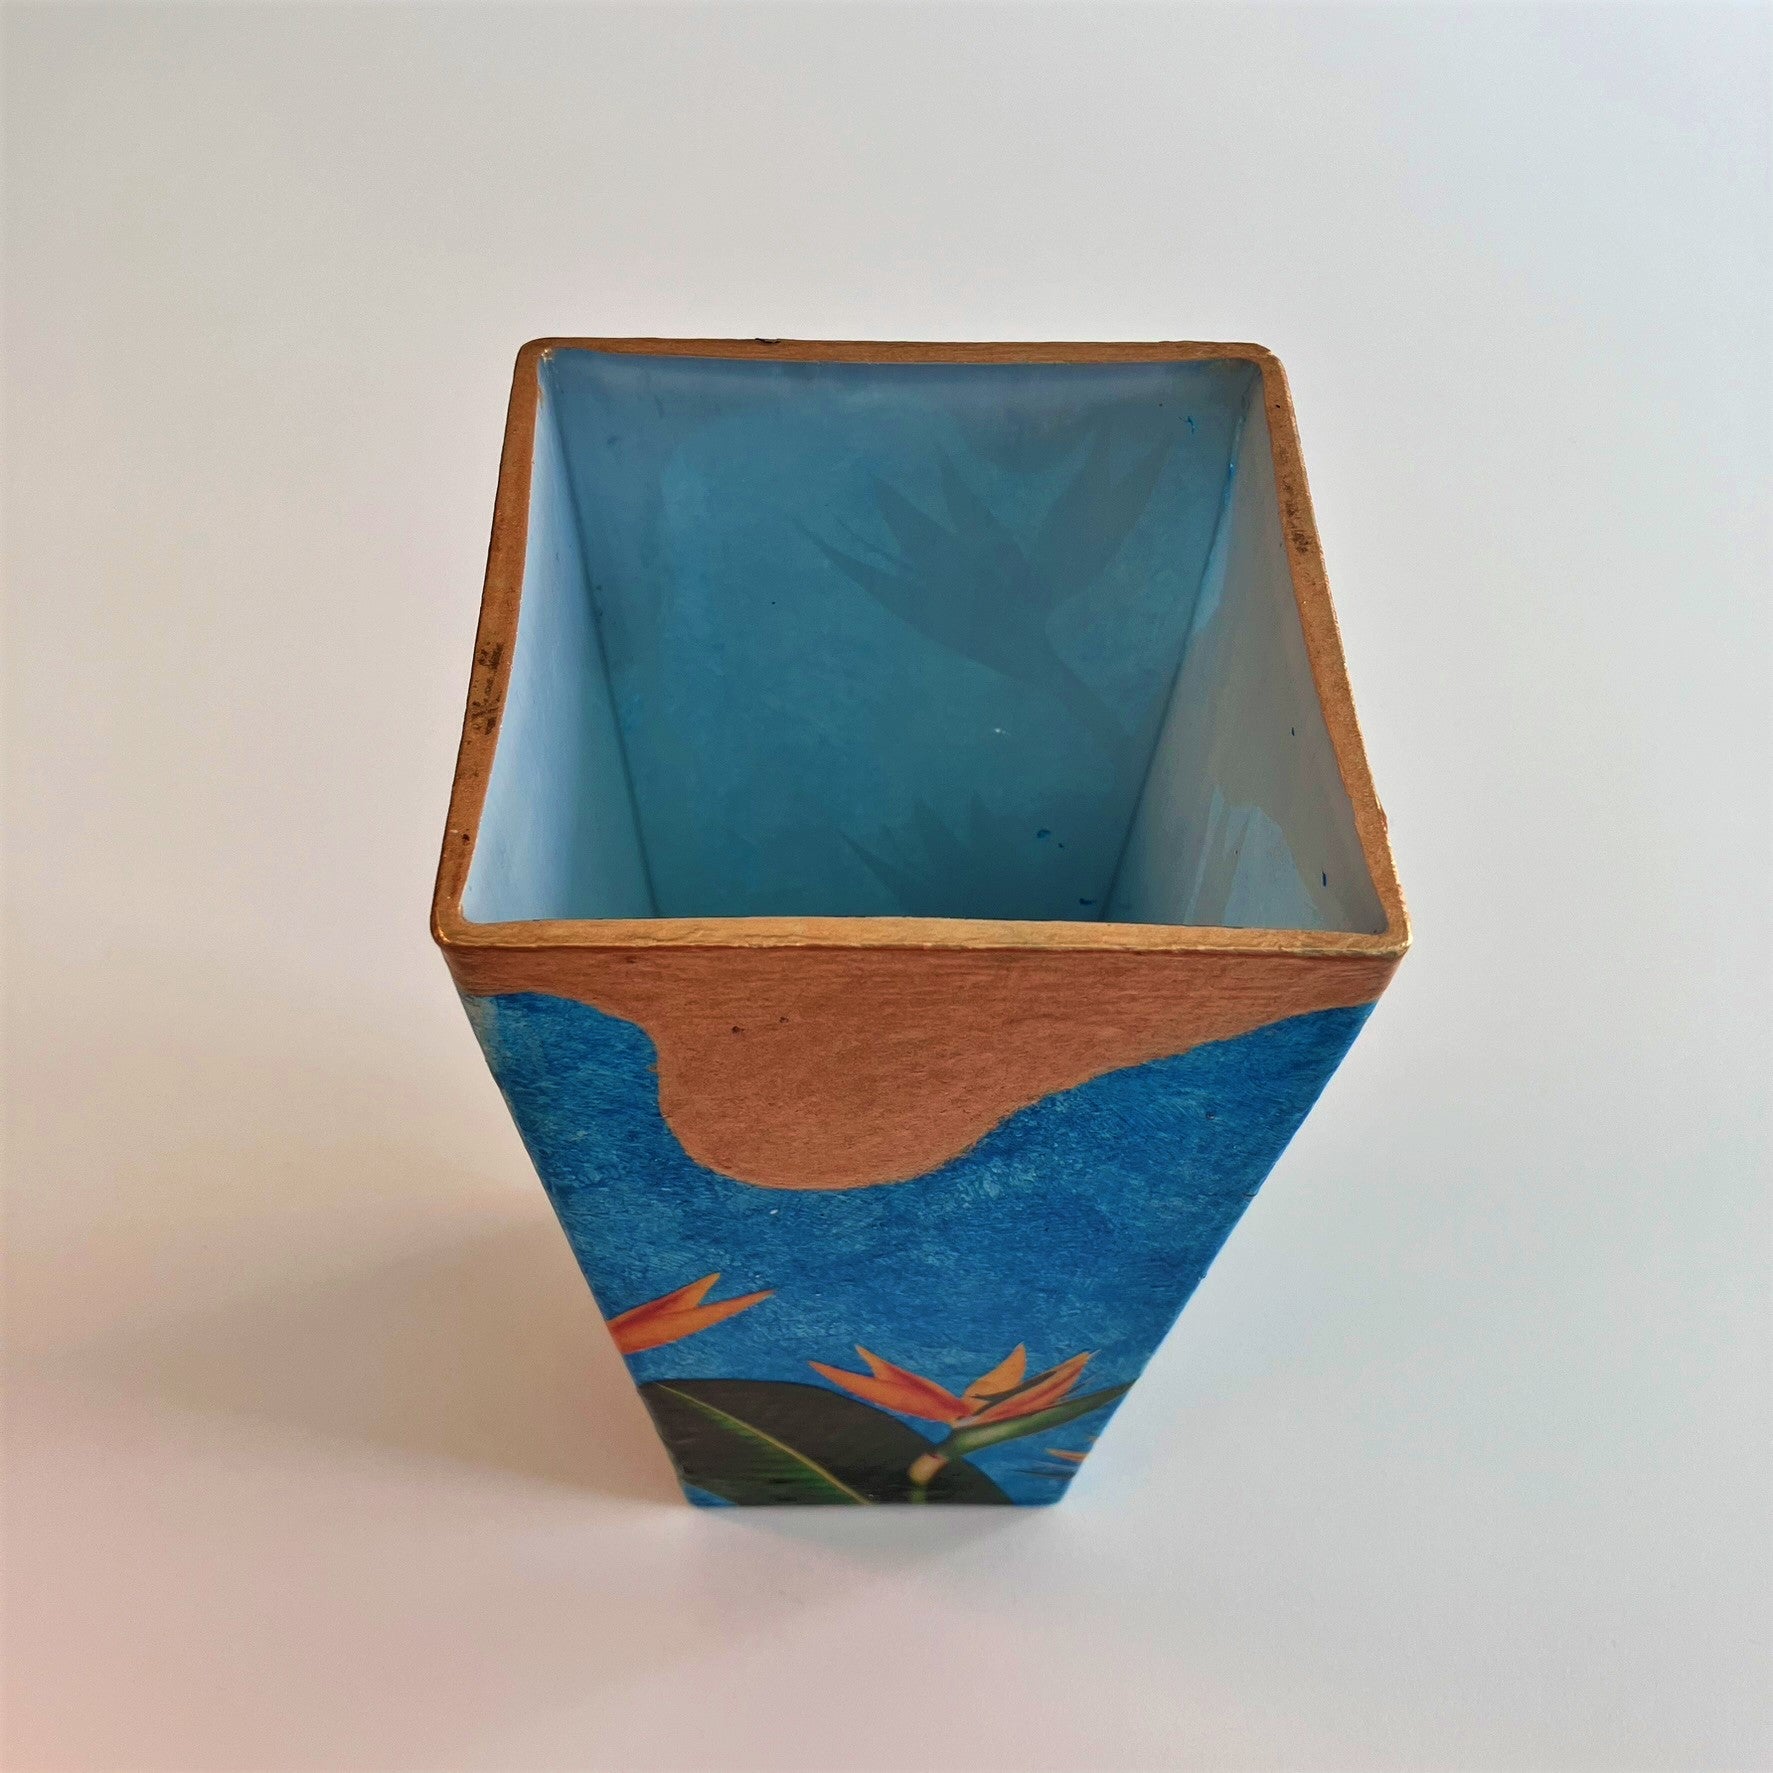 "Strelitzia" Flower Vase by House of Frisson, featuring strelitzia flowers and leaves, on a blue and golden background. Showing inside of the vase.